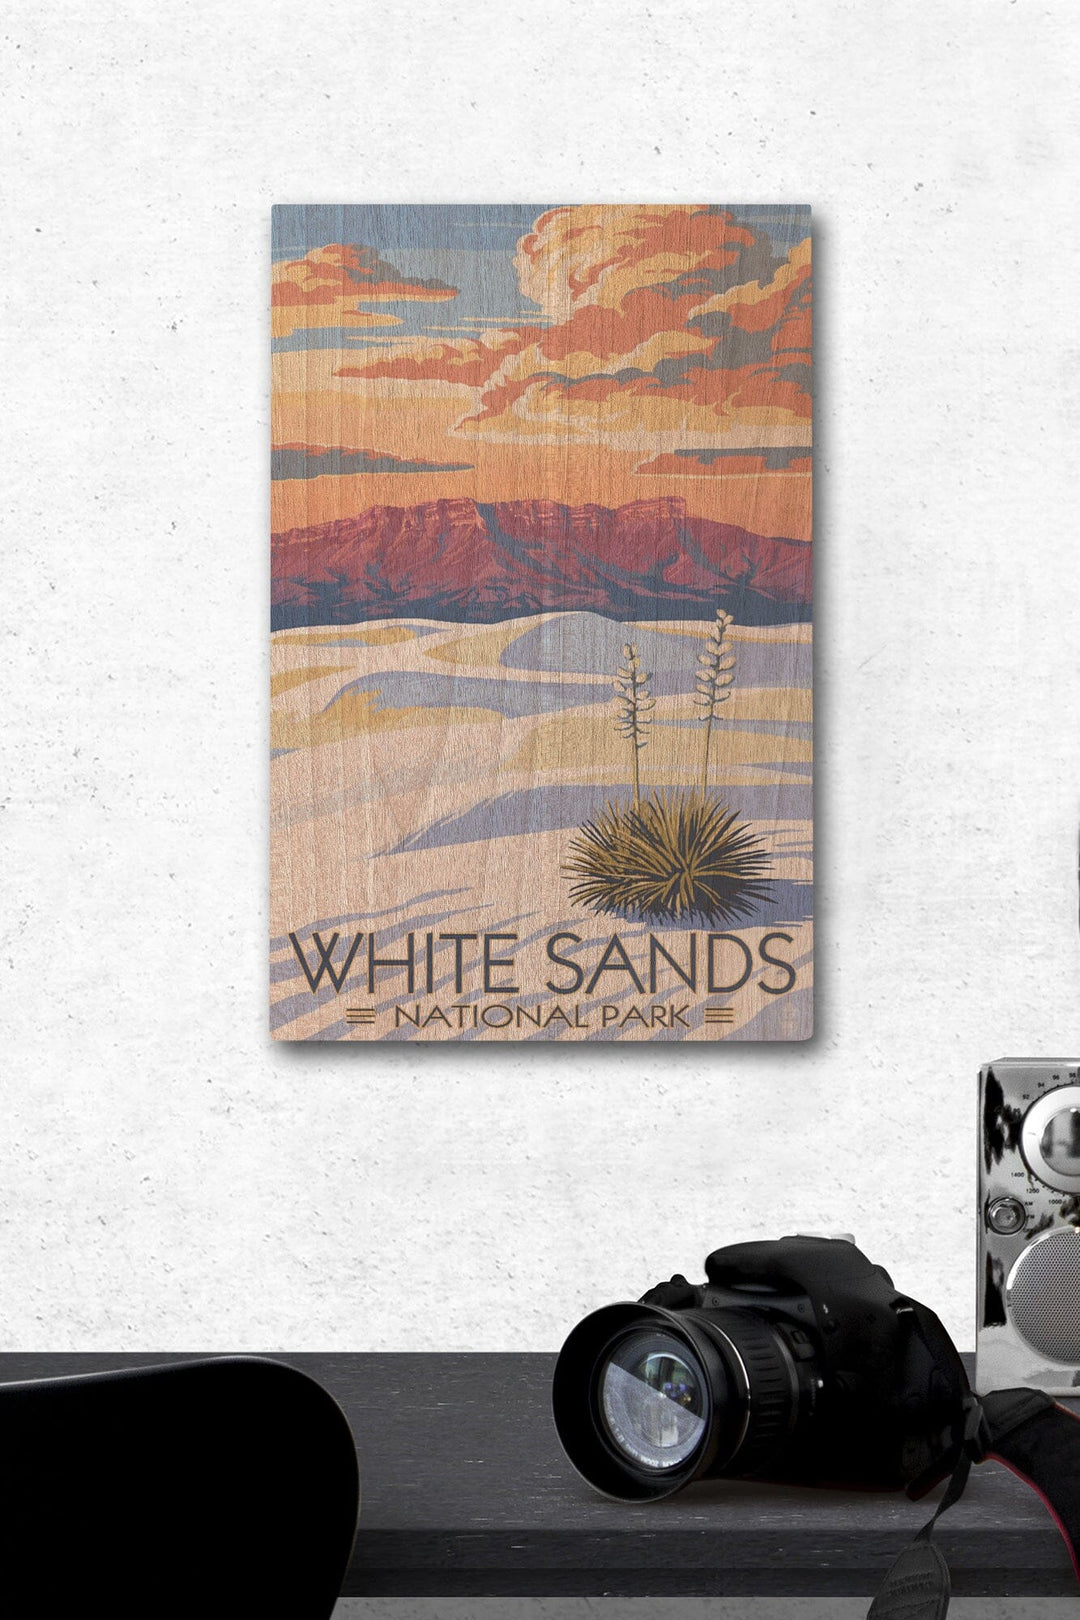 White Sands National Park, New Mexico, Sunset Scene, Lantern Press Artwork, Wood Signs and Postcards Wood Lantern Press 12 x 18 Wood Gallery Print 